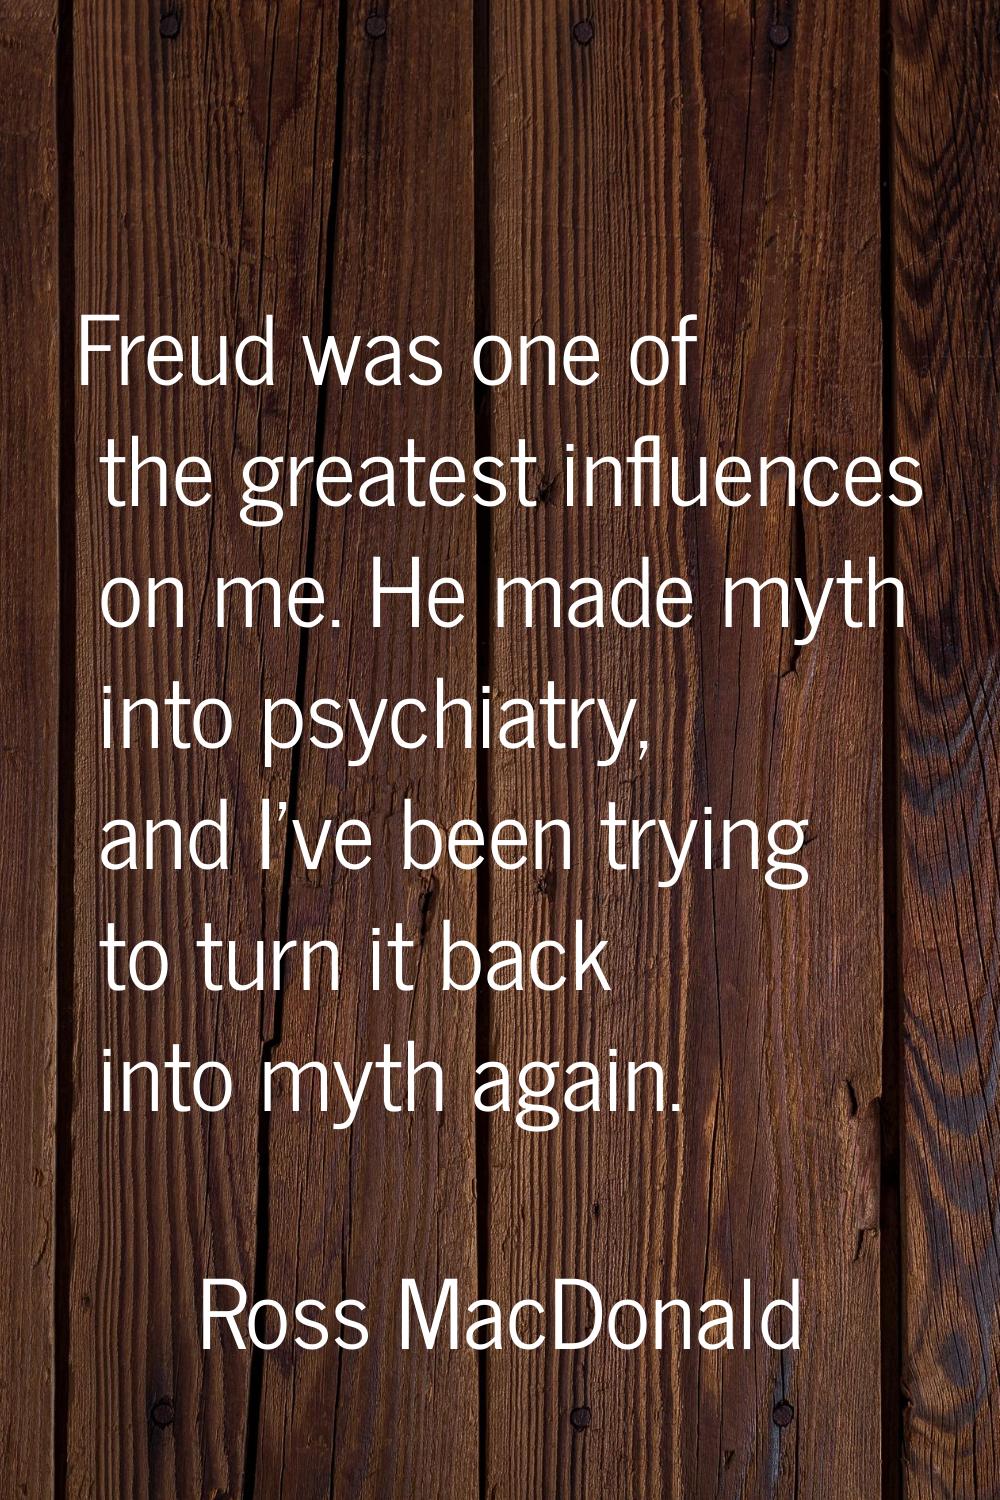 Freud was one of the greatest influences on me. He made myth into psychiatry, and I've been trying 